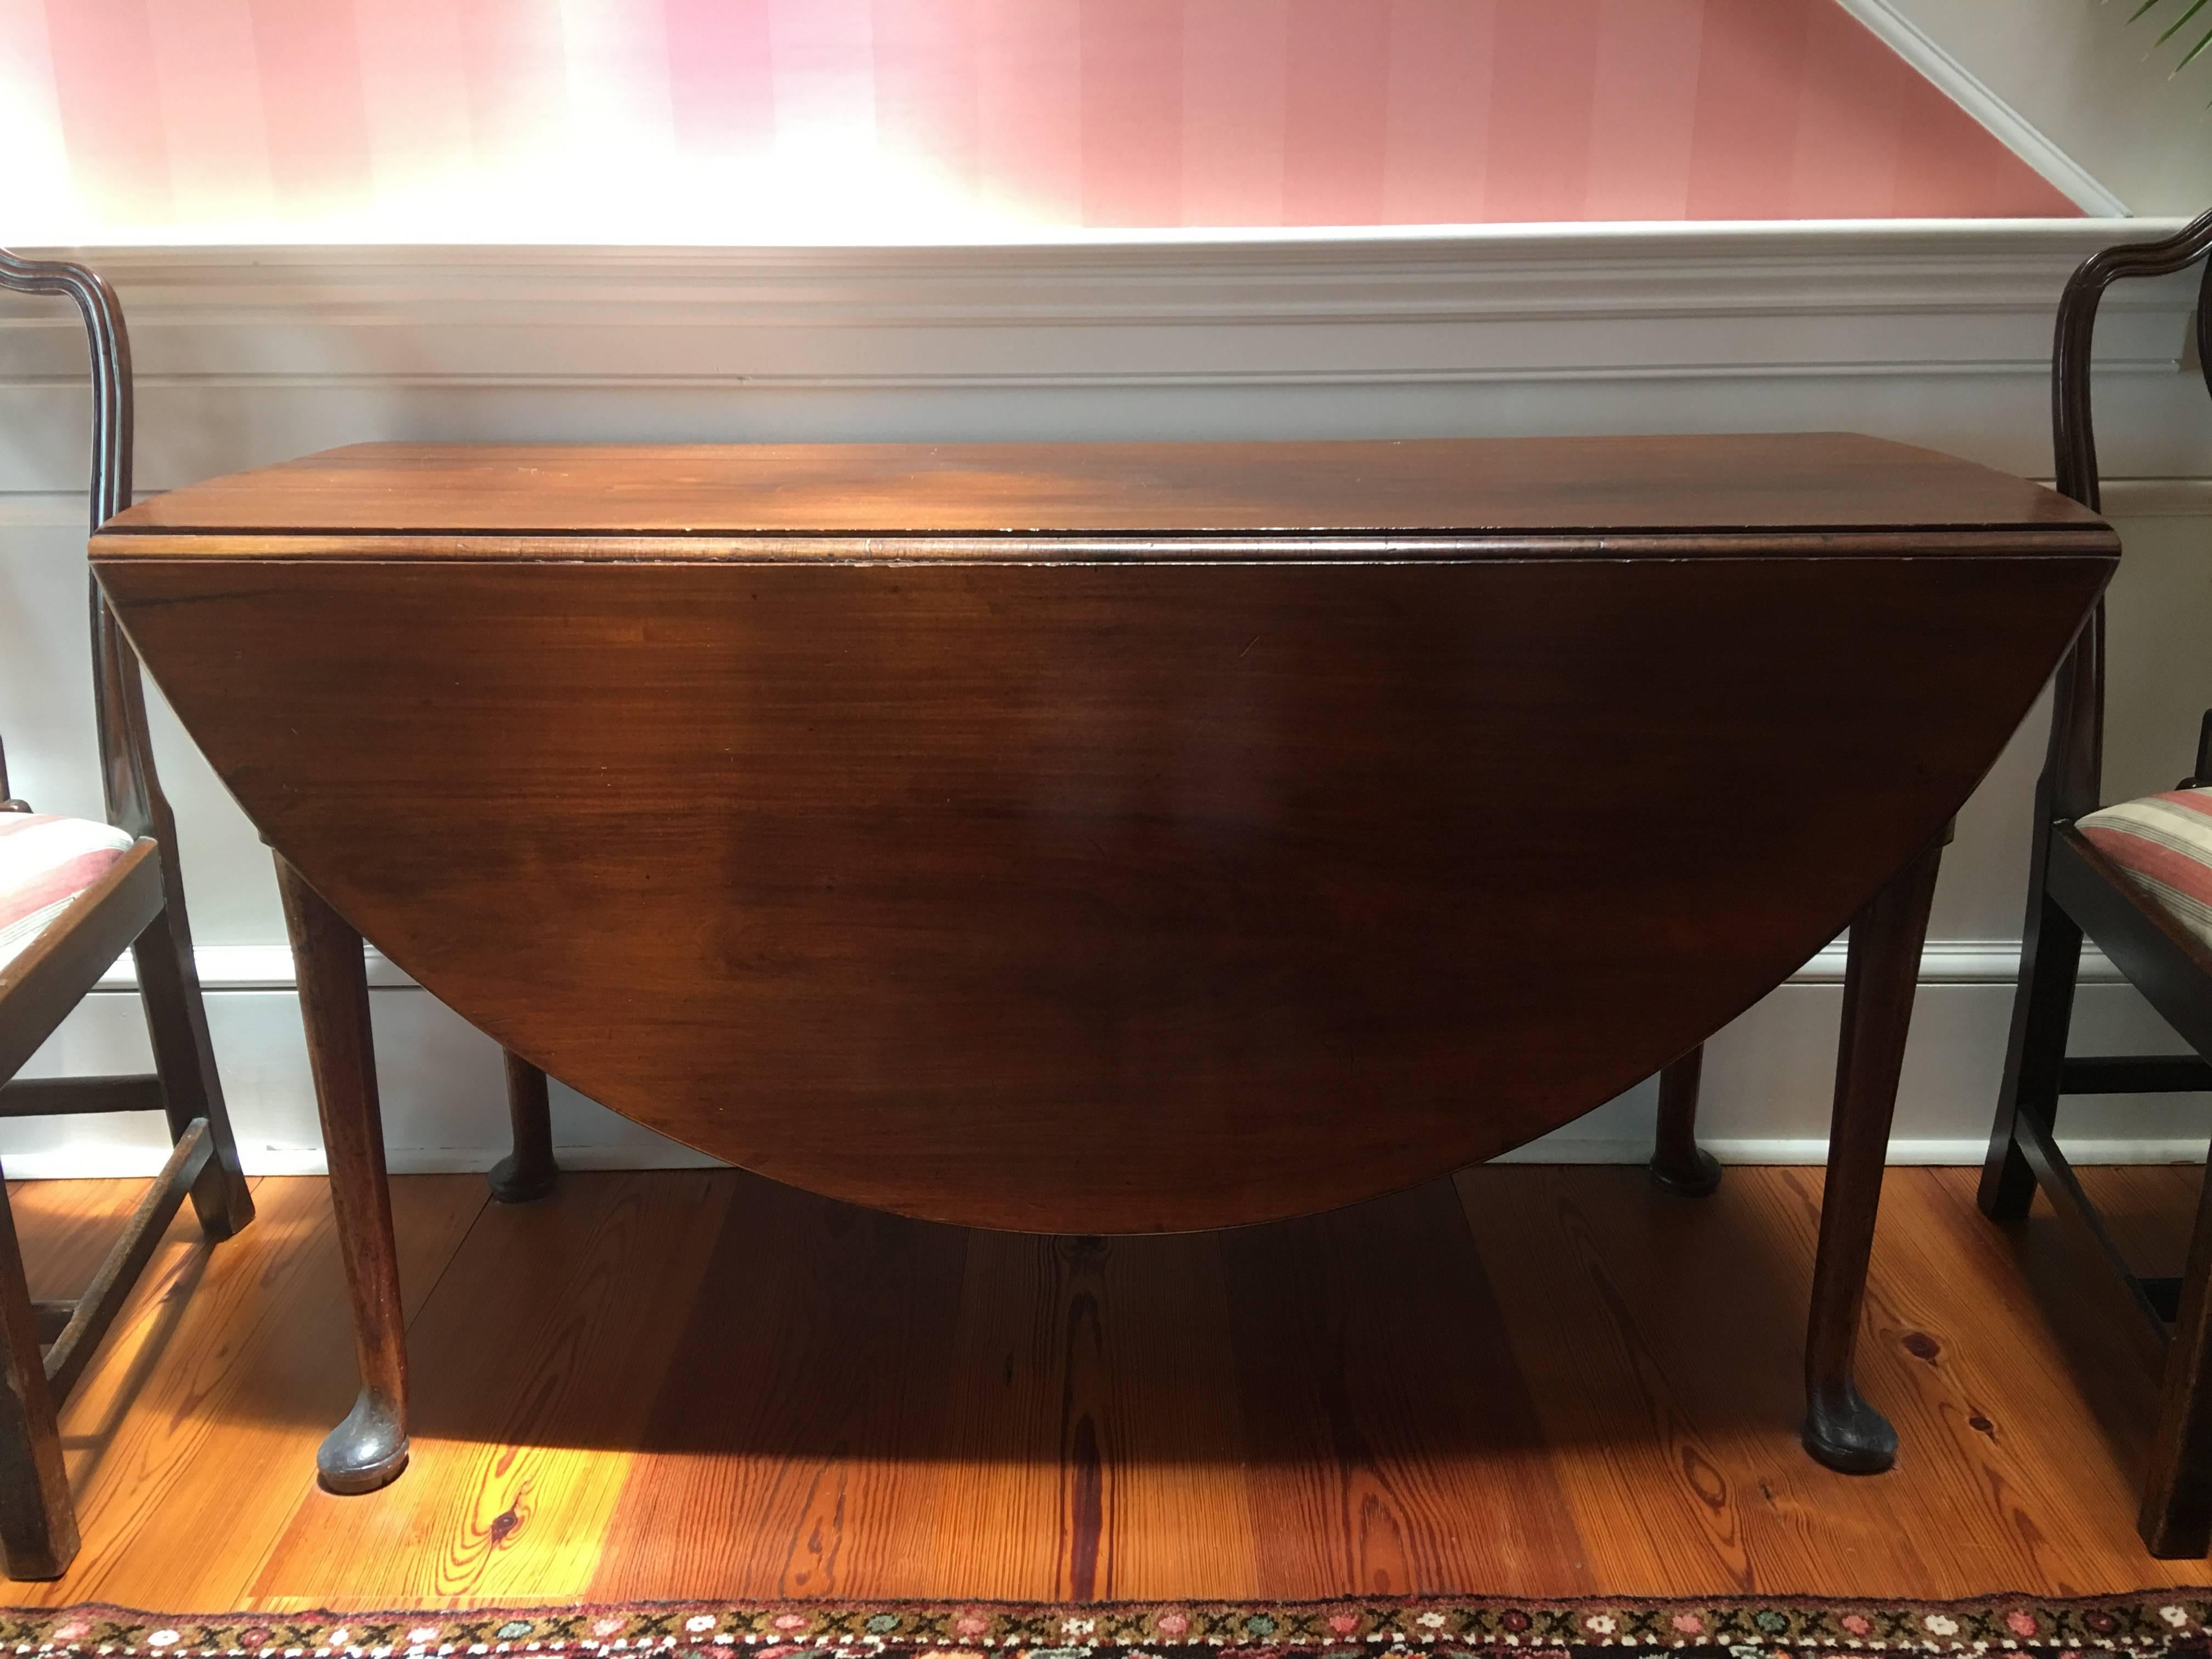 American Queen Anne mahogany oval drop-leaf table with pad feet, mid-18th century. It features a molded oval one inch thick top surmounting a rectangular apron, supported by turned tapering legs terminating in pad feet, swing legs supporting the